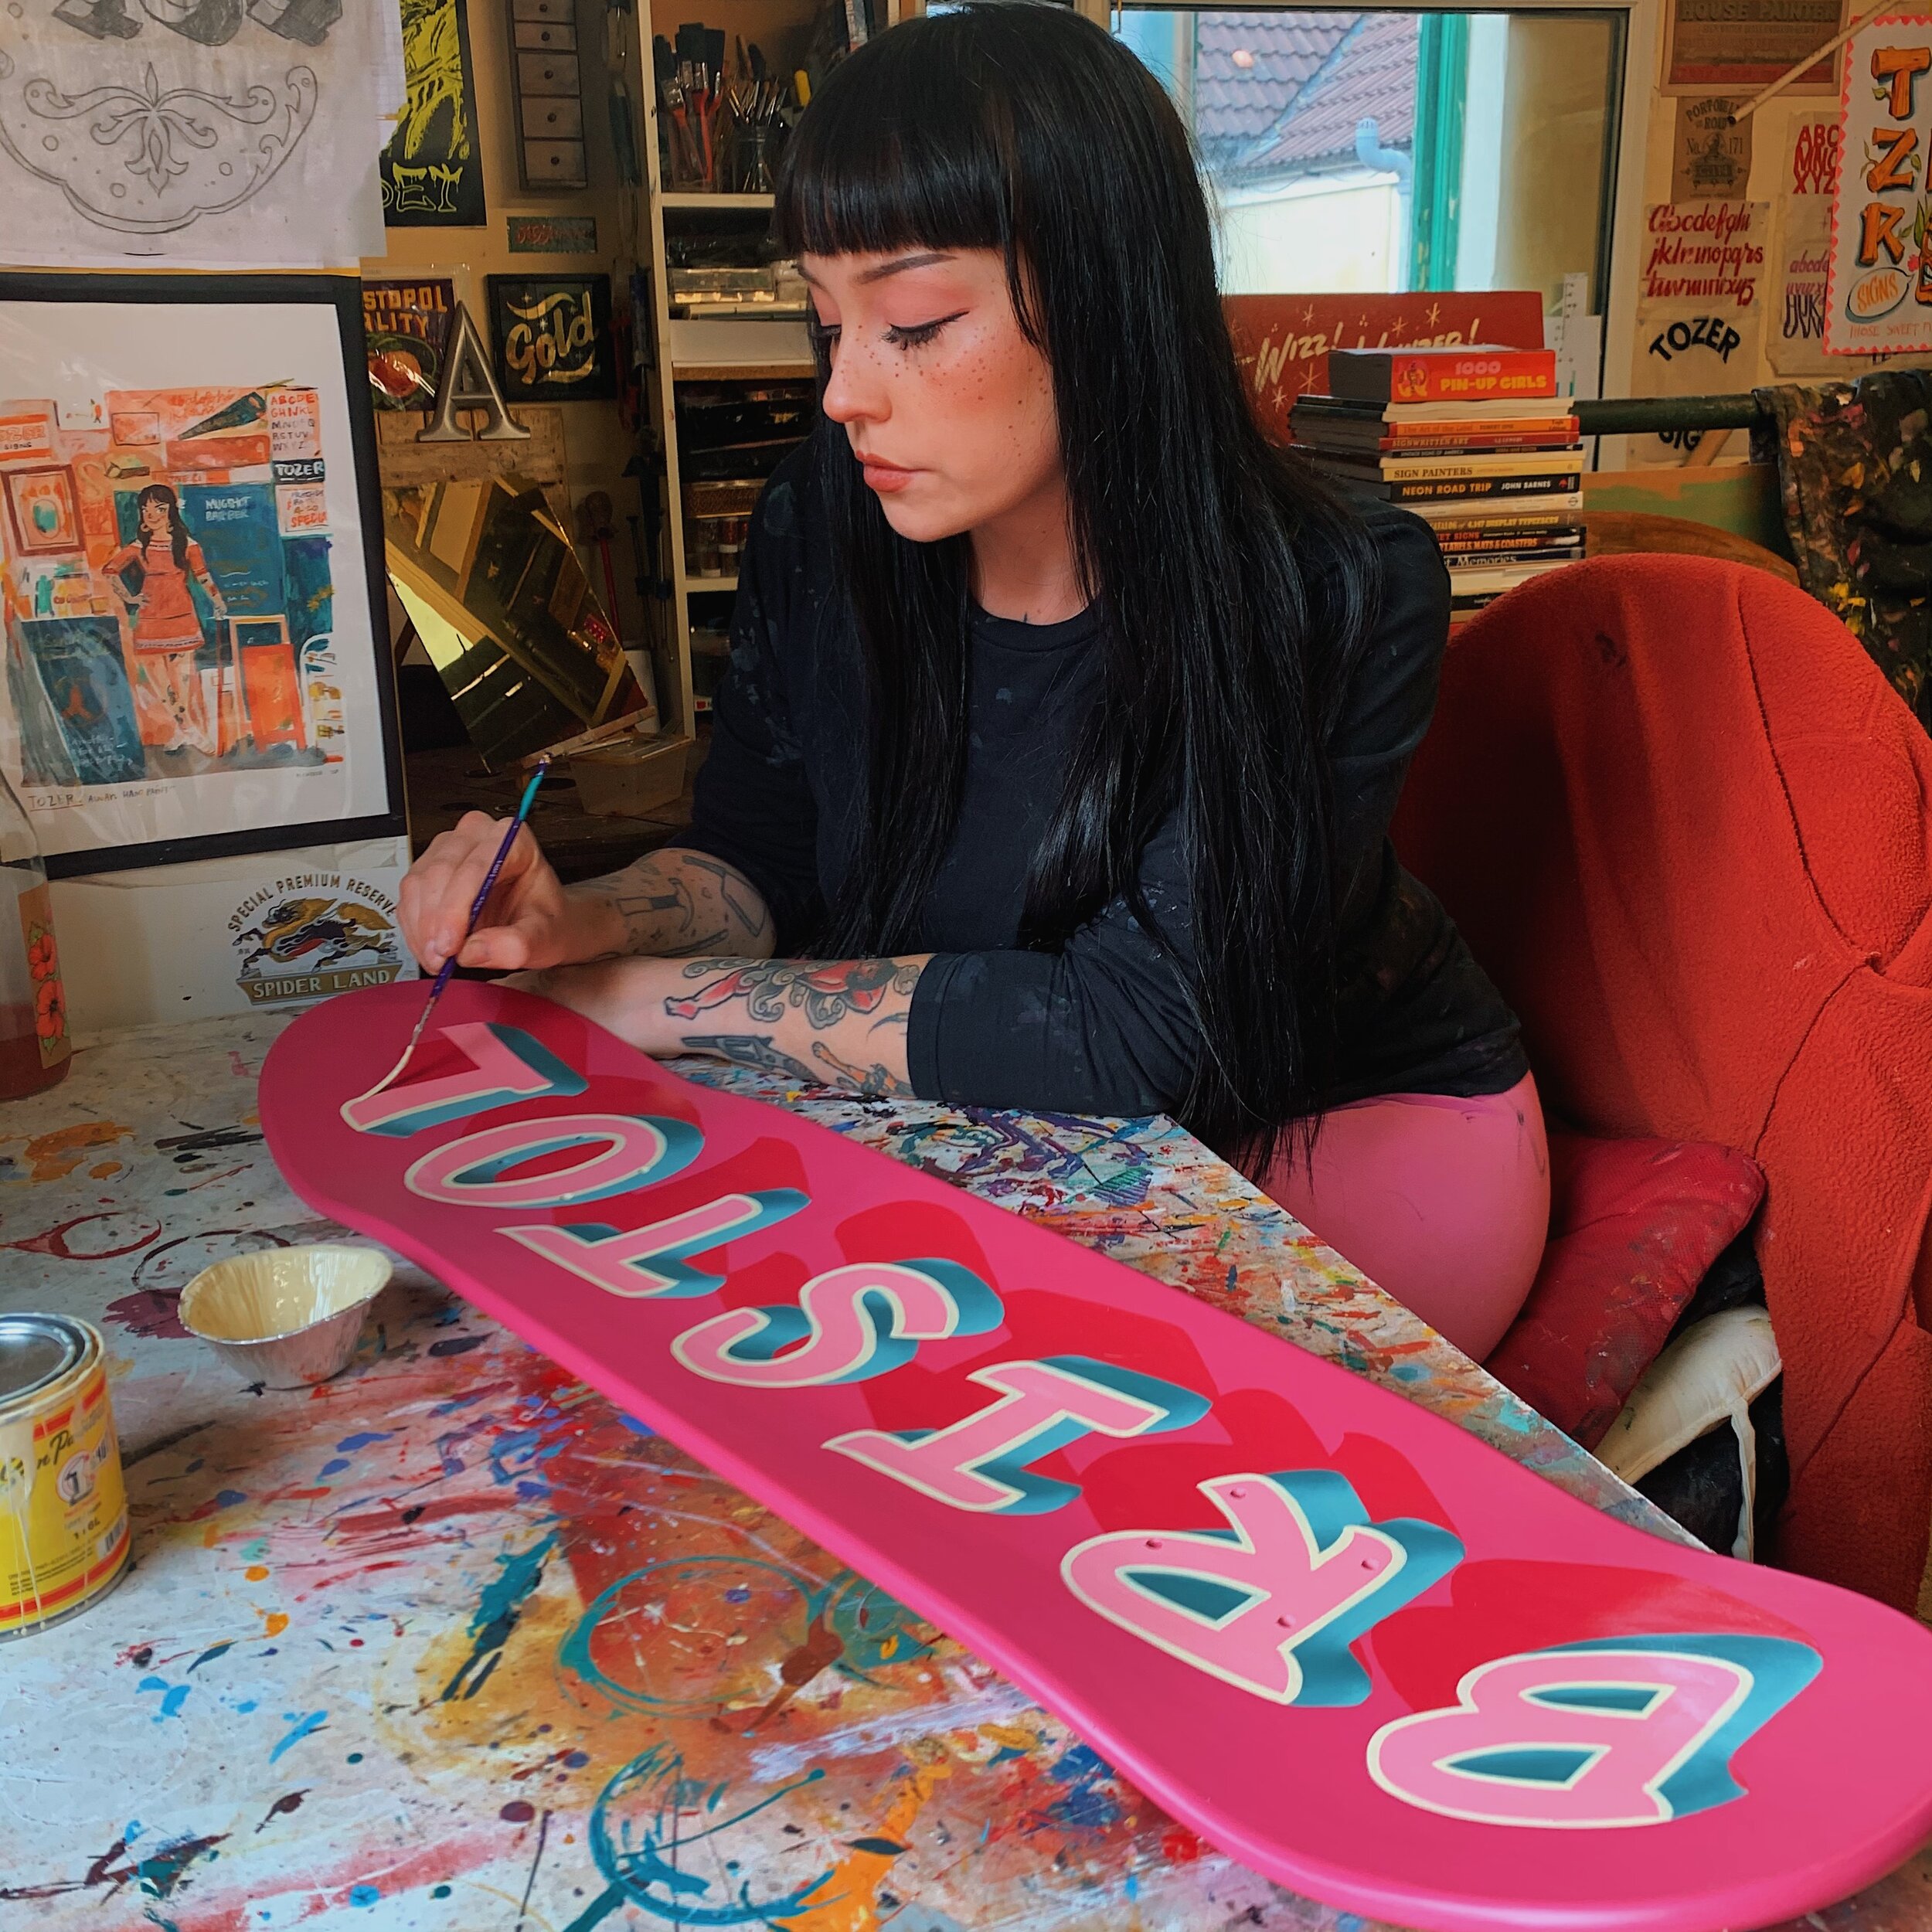 Tozer Signs hand-painting a skate deck with the word 'Bristol'.